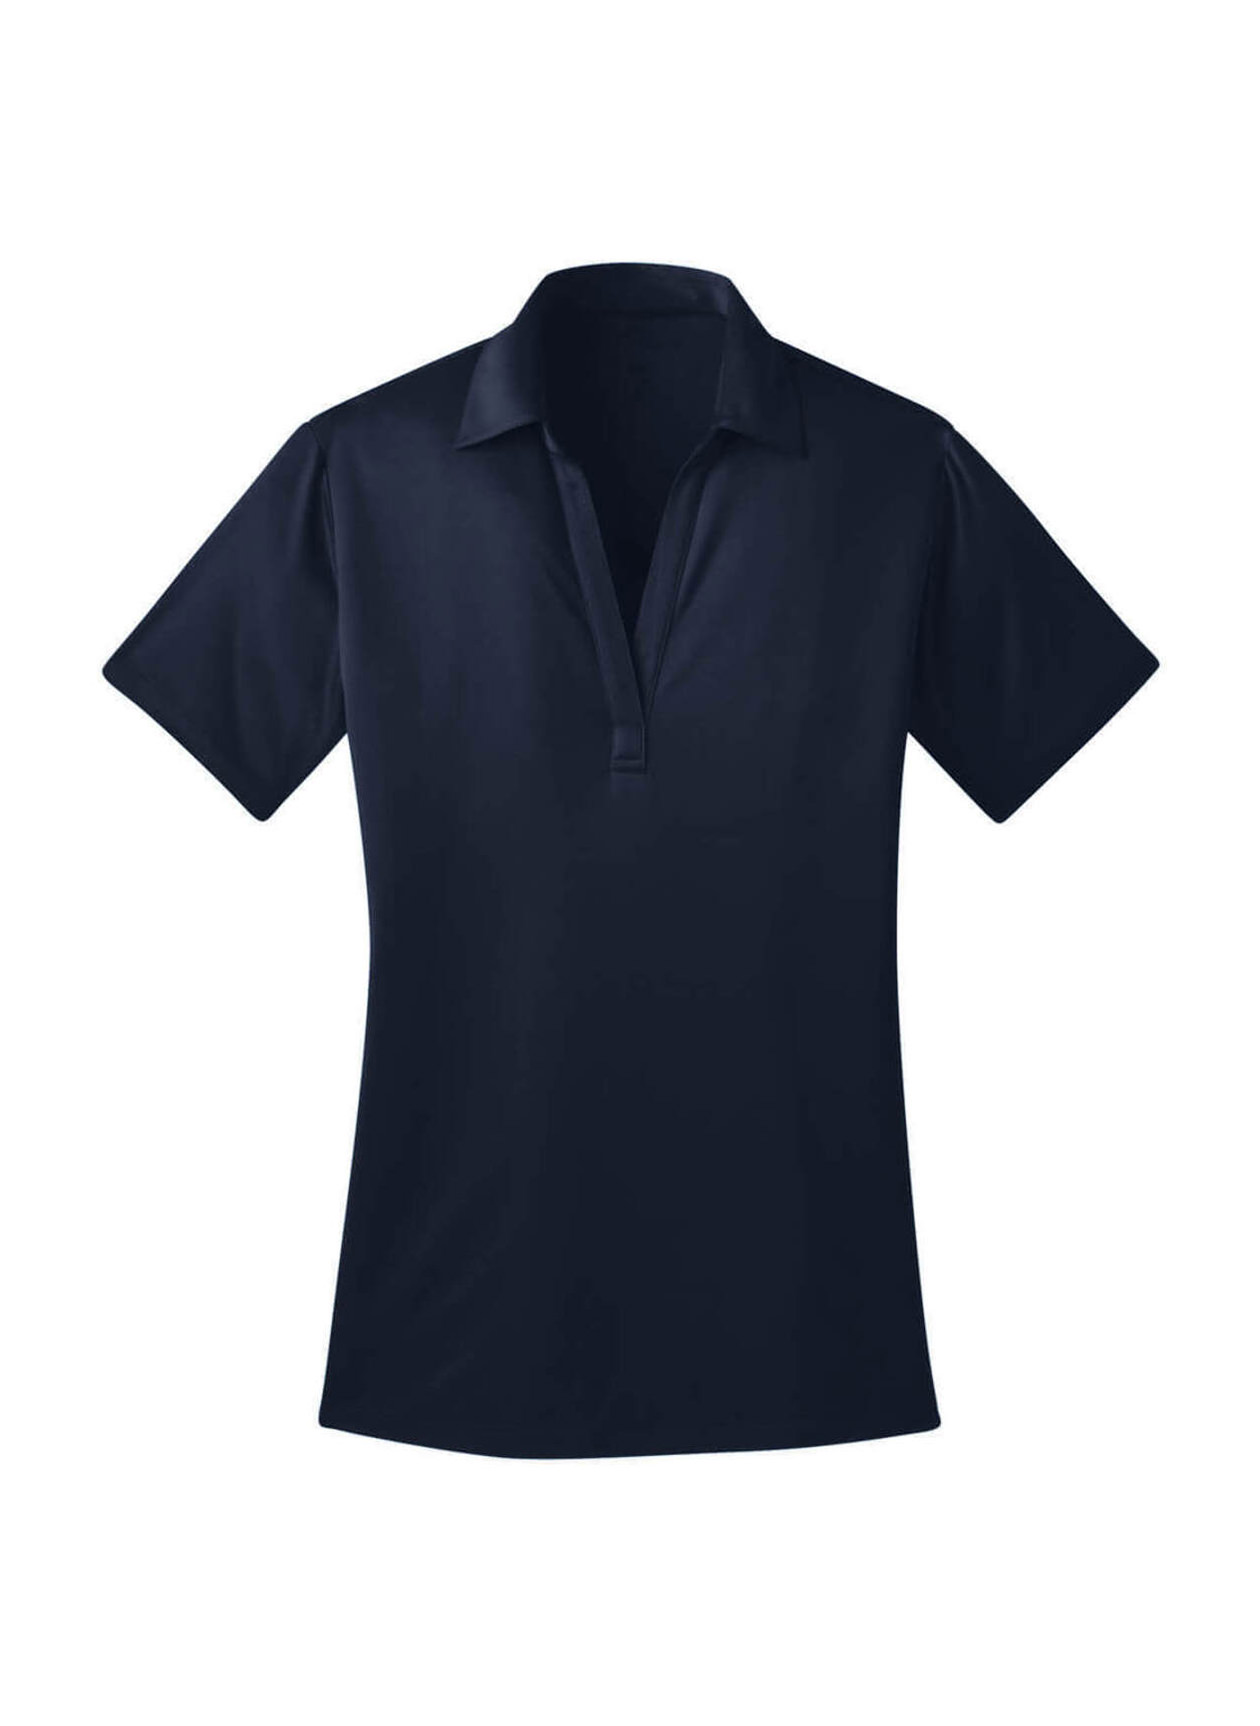 Port Authority Women's Navy Silk Touch Performance Polo